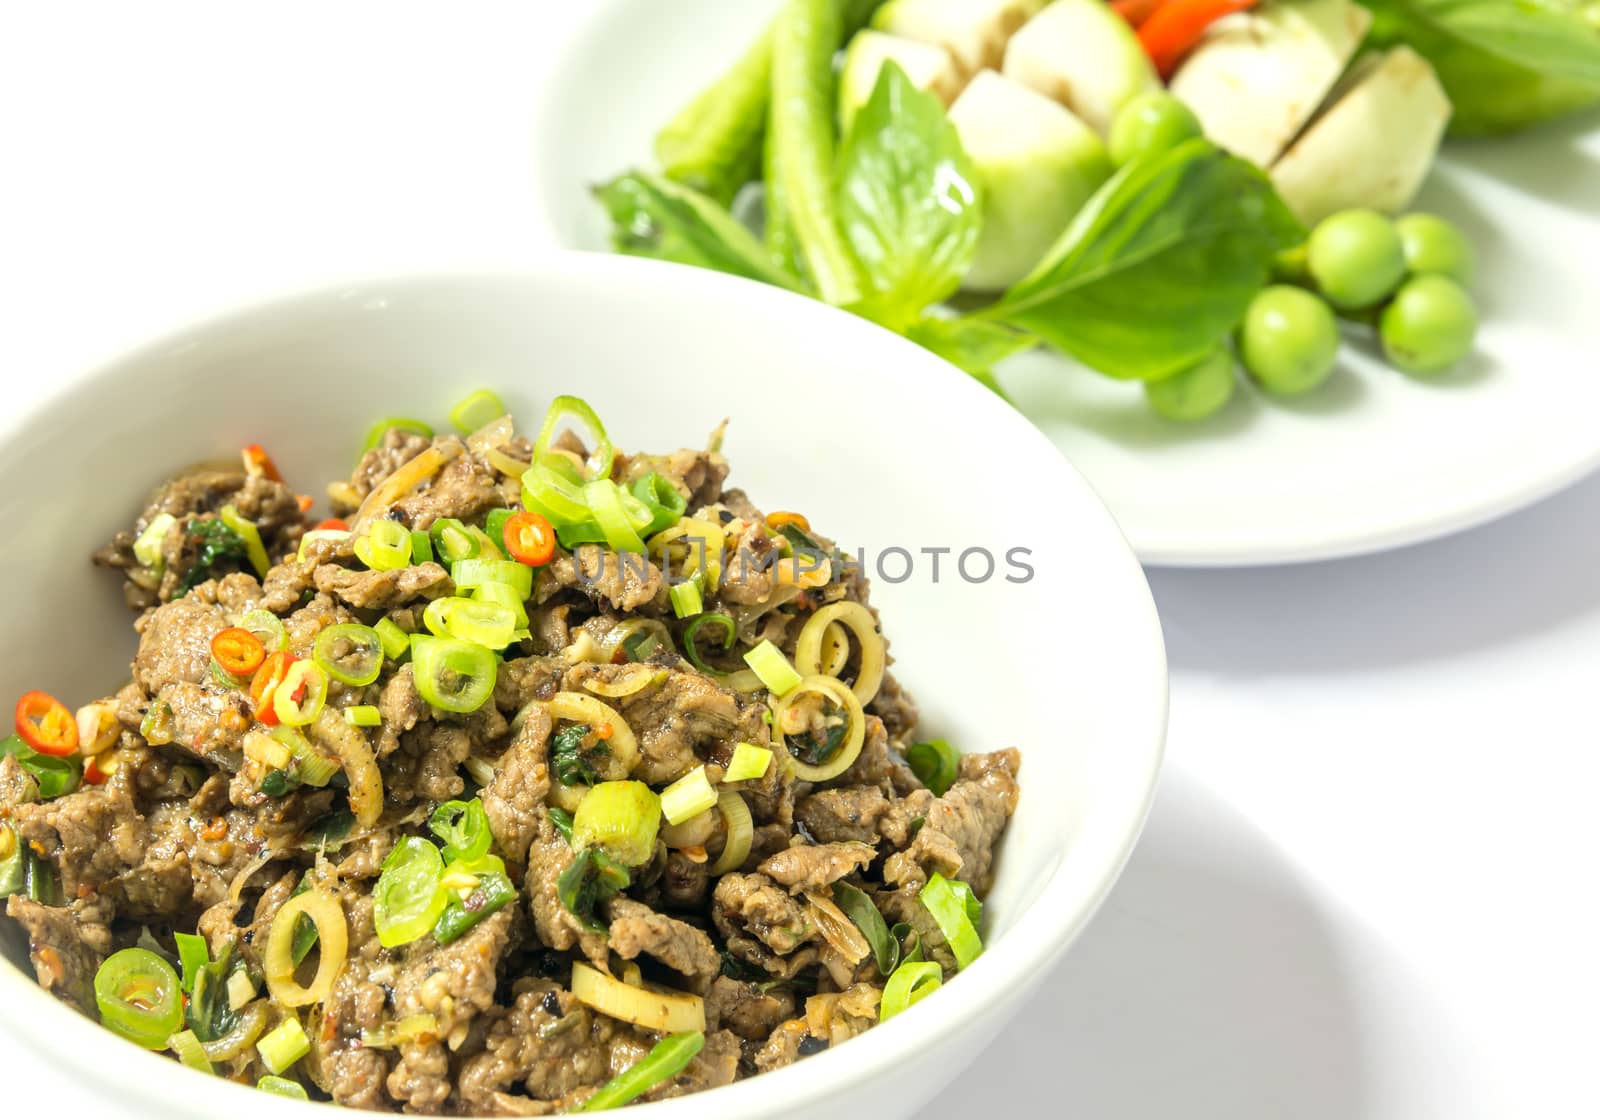 Cooked Minced Meat Spicy Salad by matter77